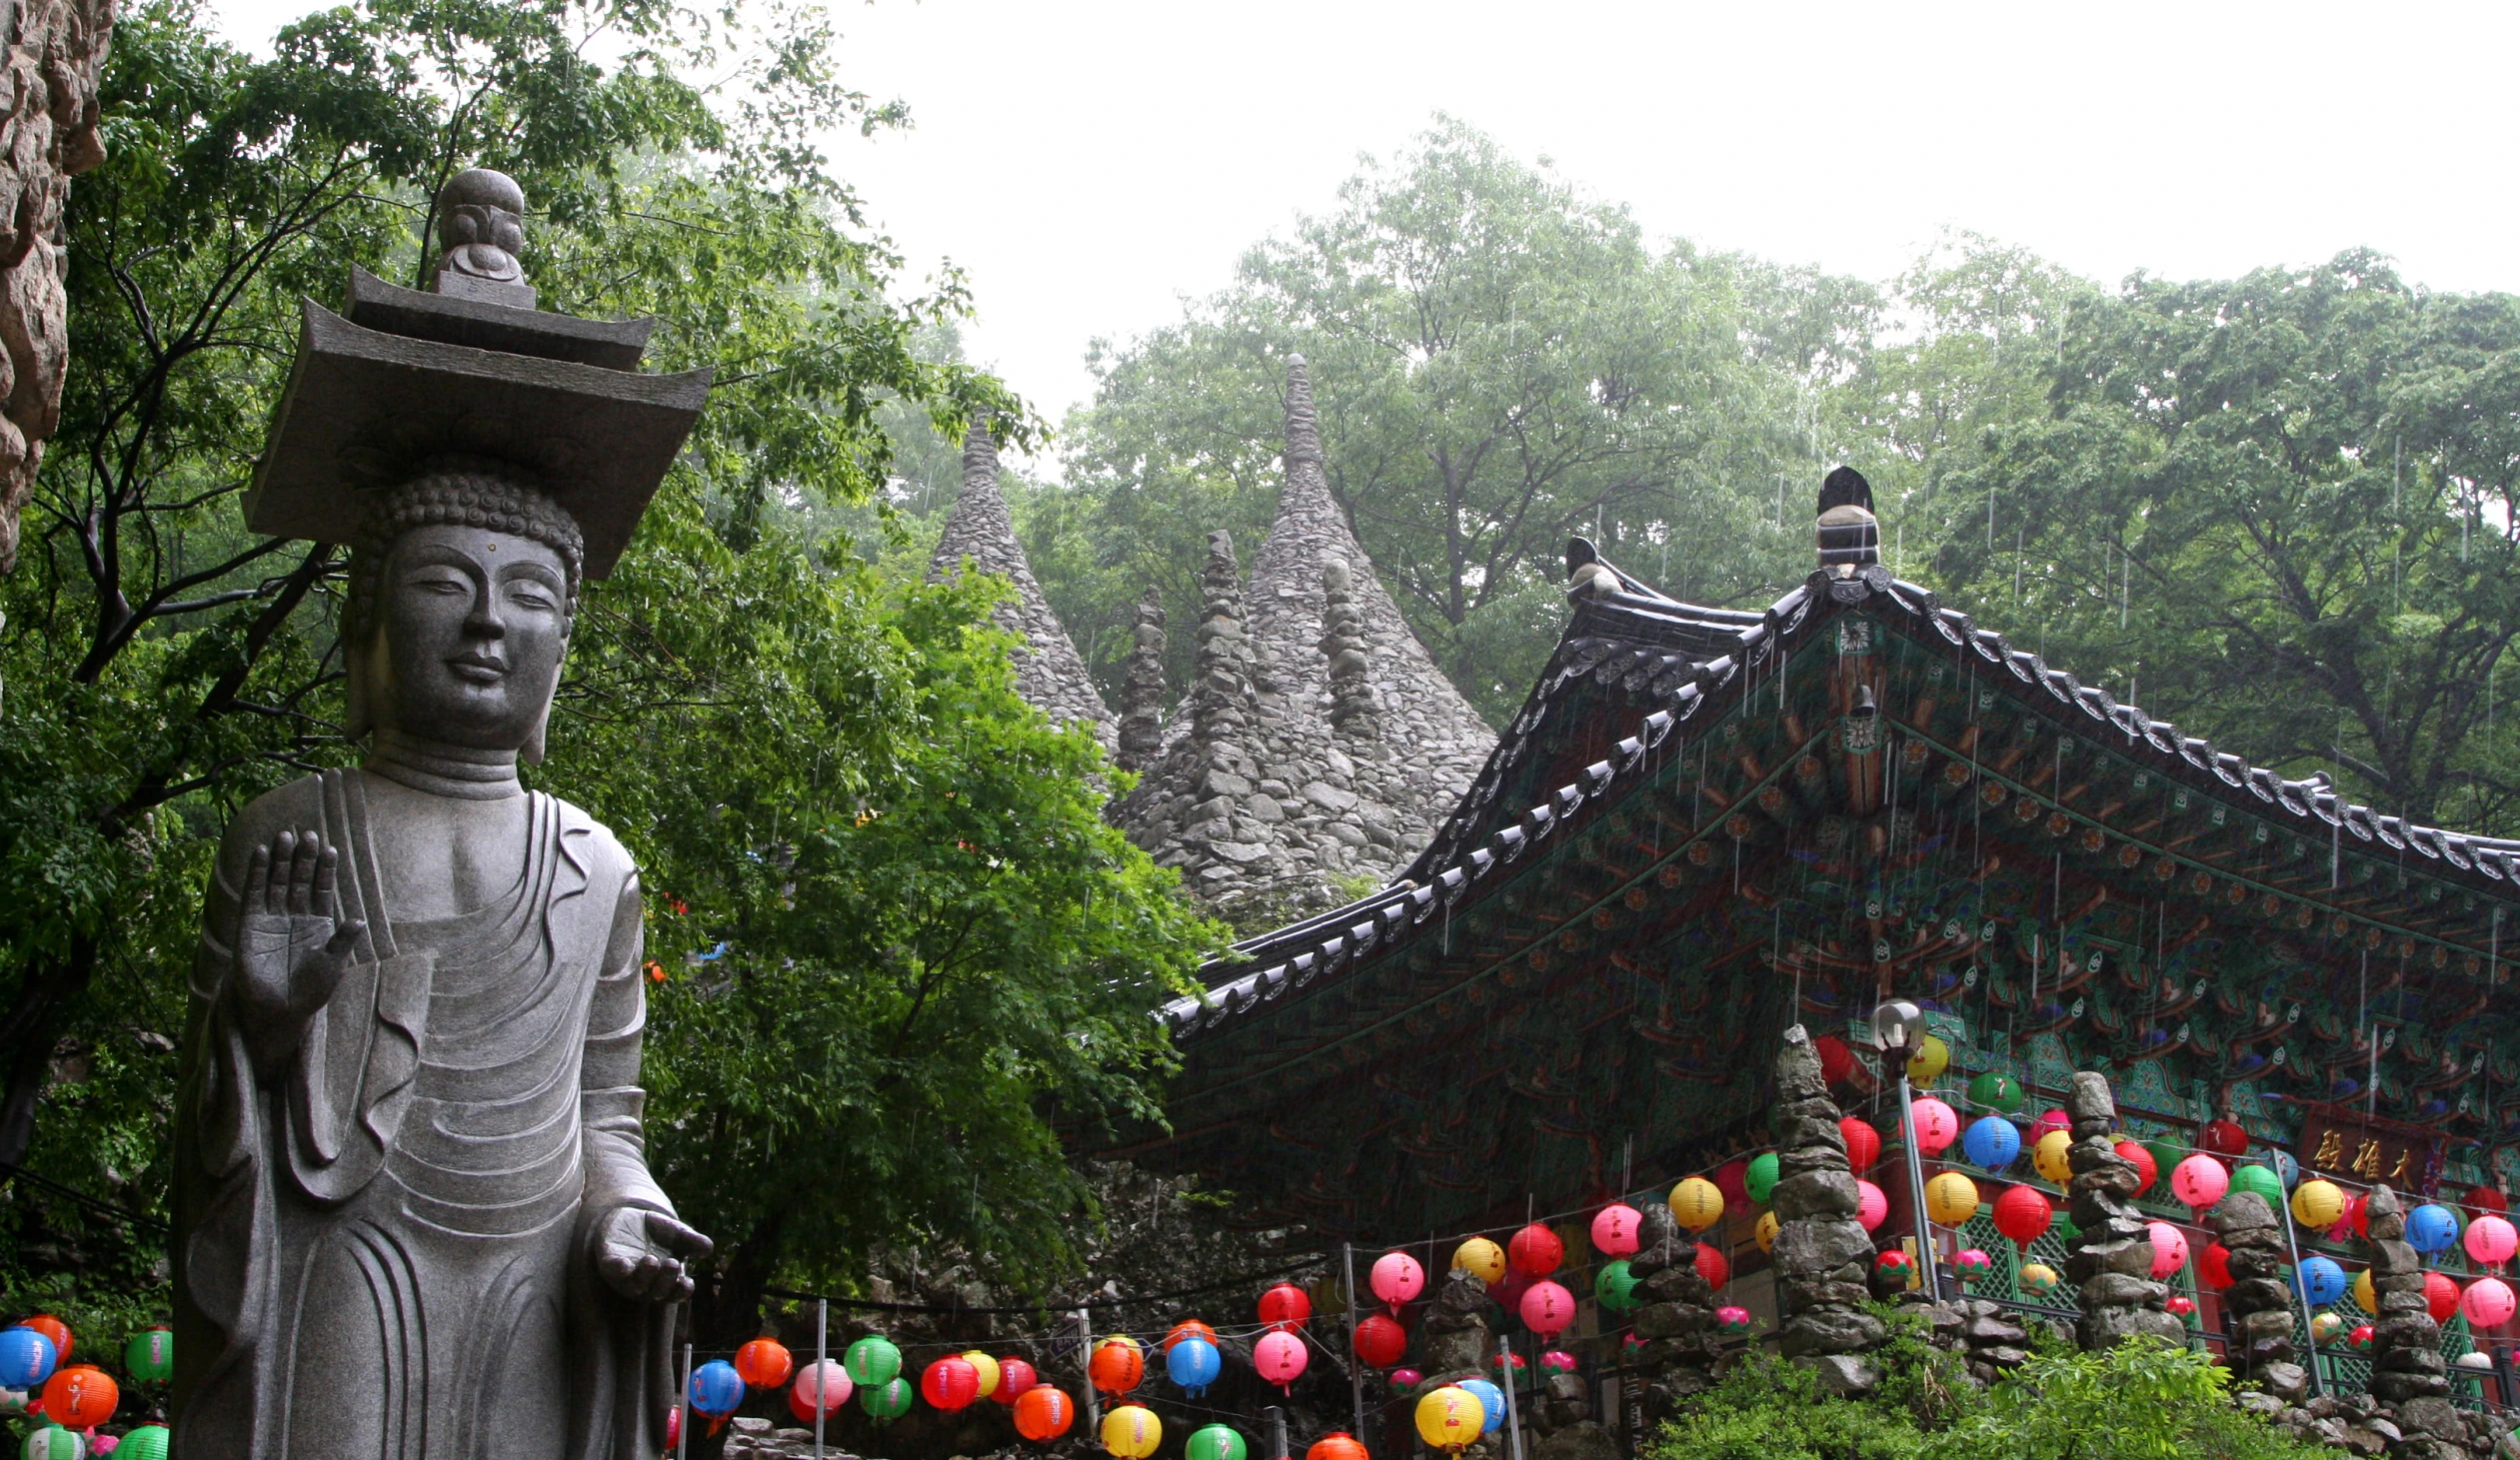 two buddha statues in the foreground surrounded by colorful balloons